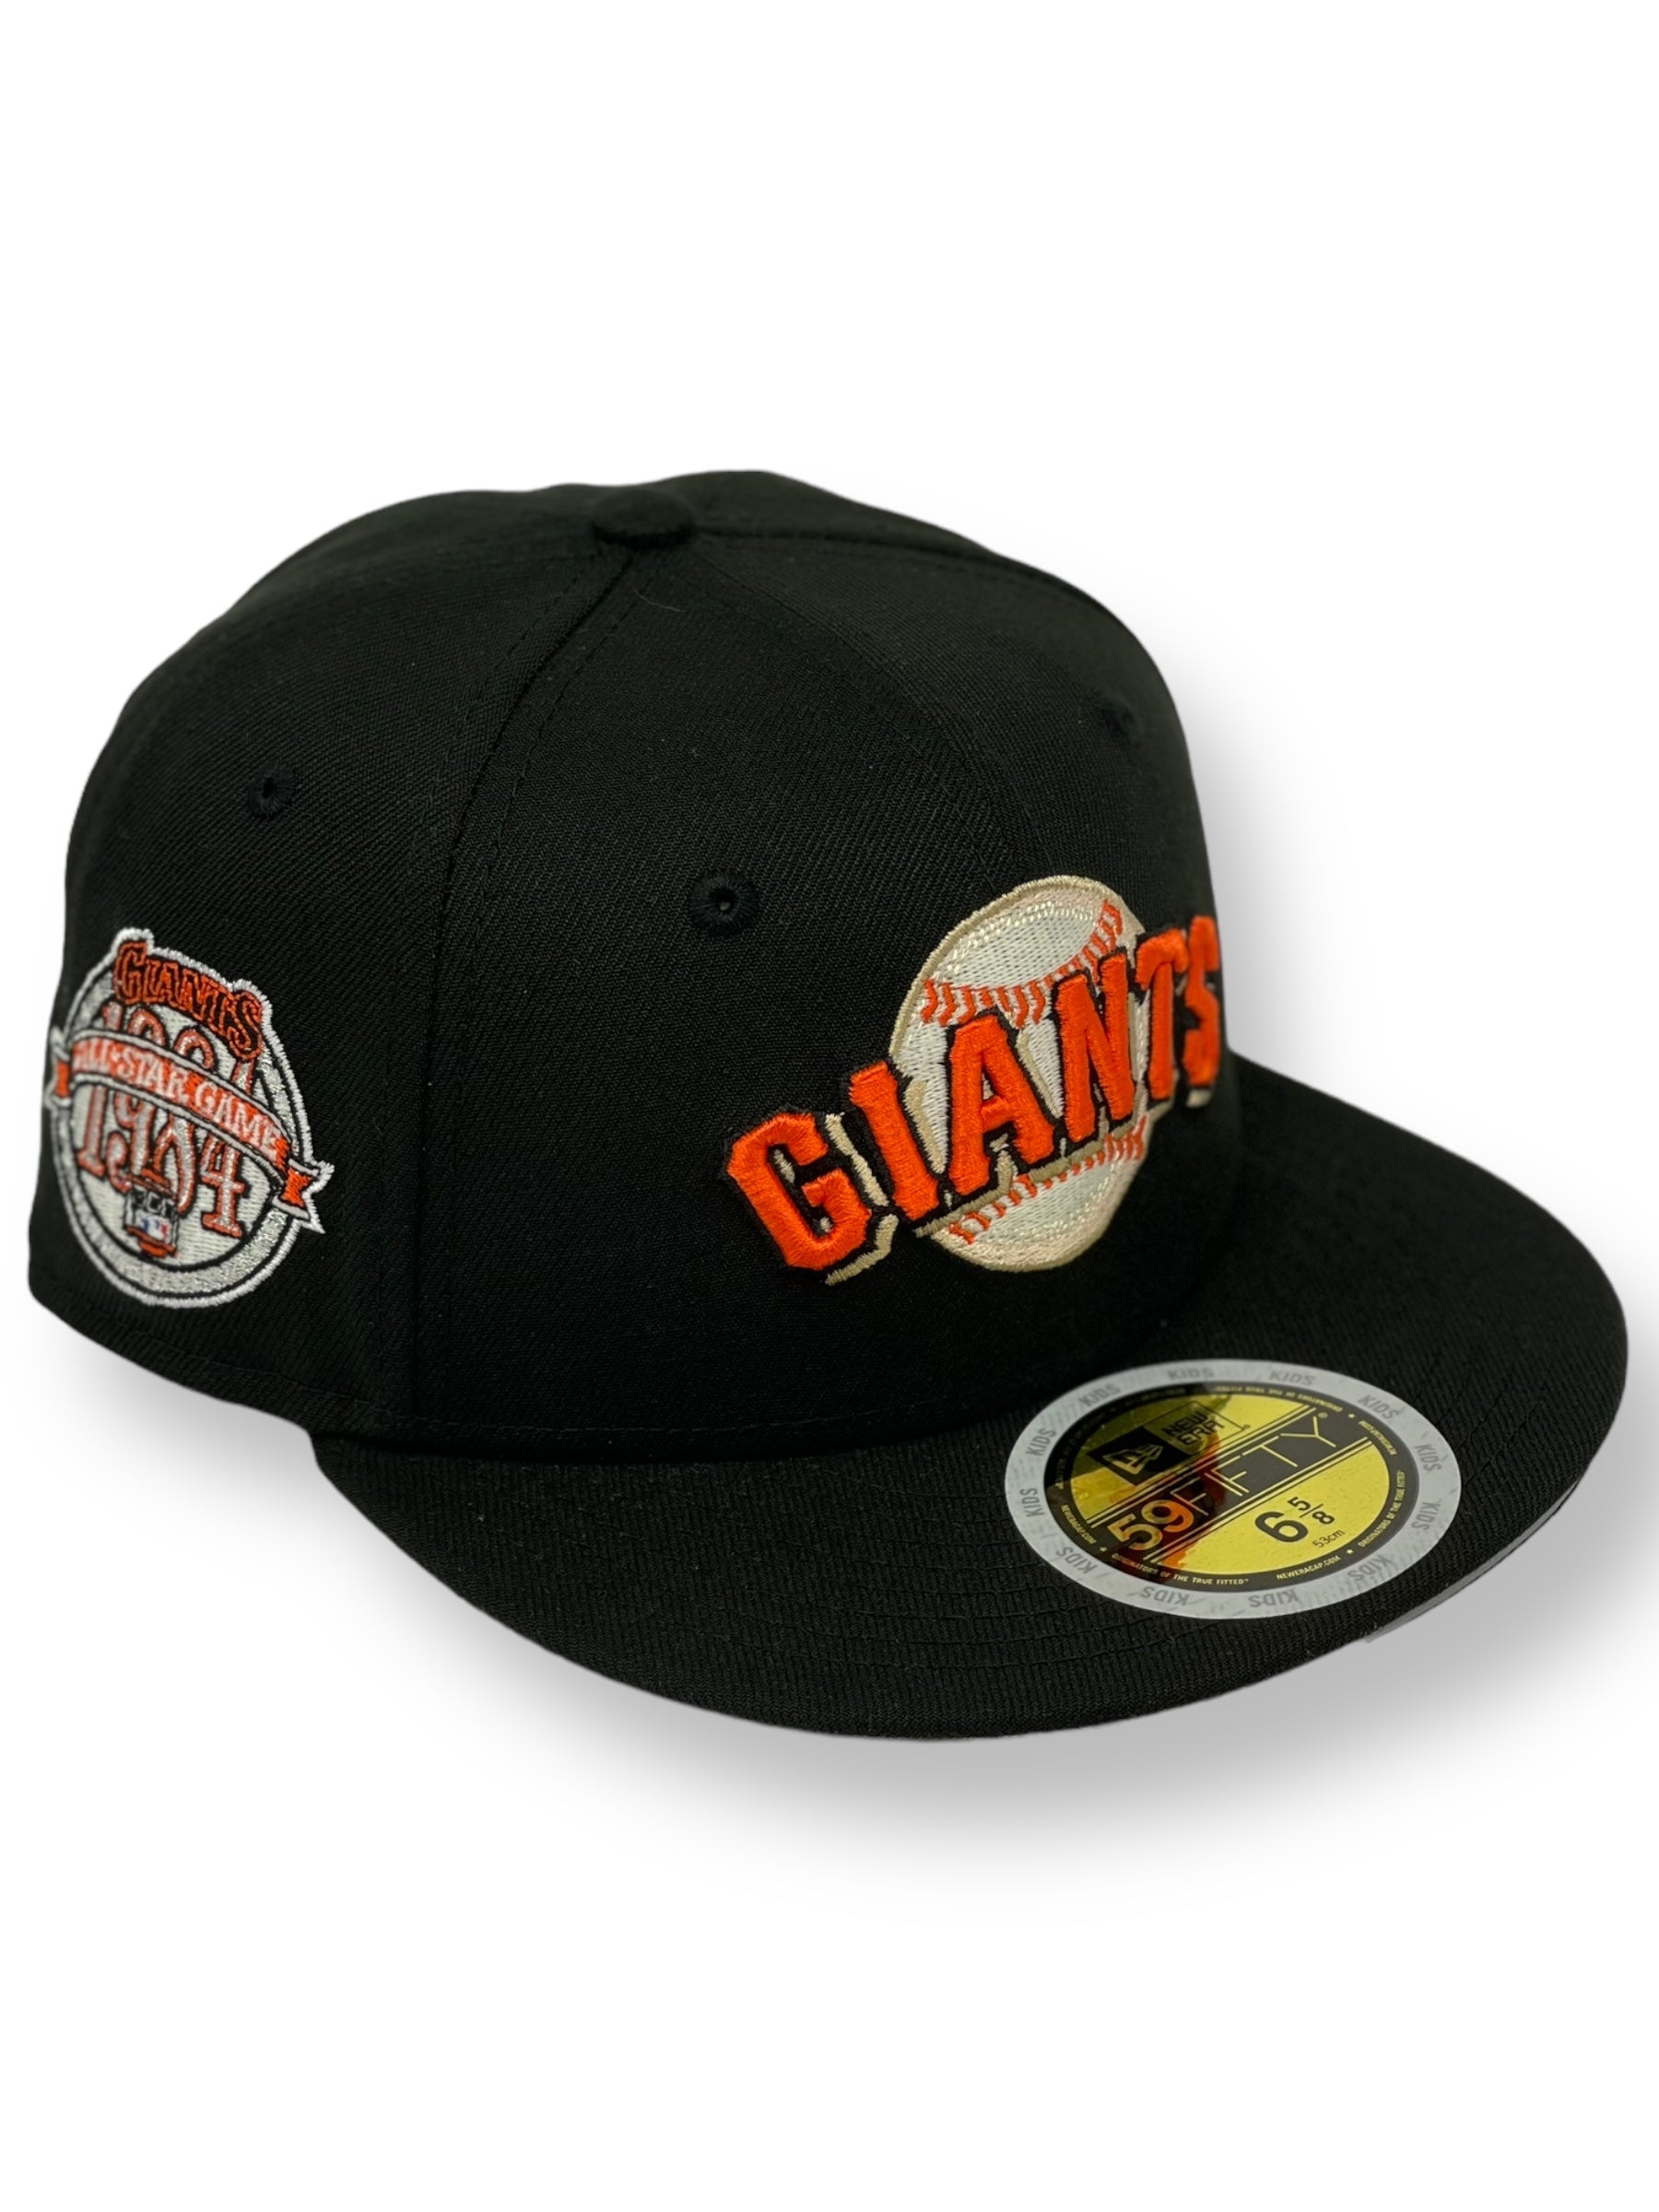 "KIDS" SAN FRANCISCO GIANTS (BLACK)( 1984 ASG) NEW ERA 59FIFTY FITTED